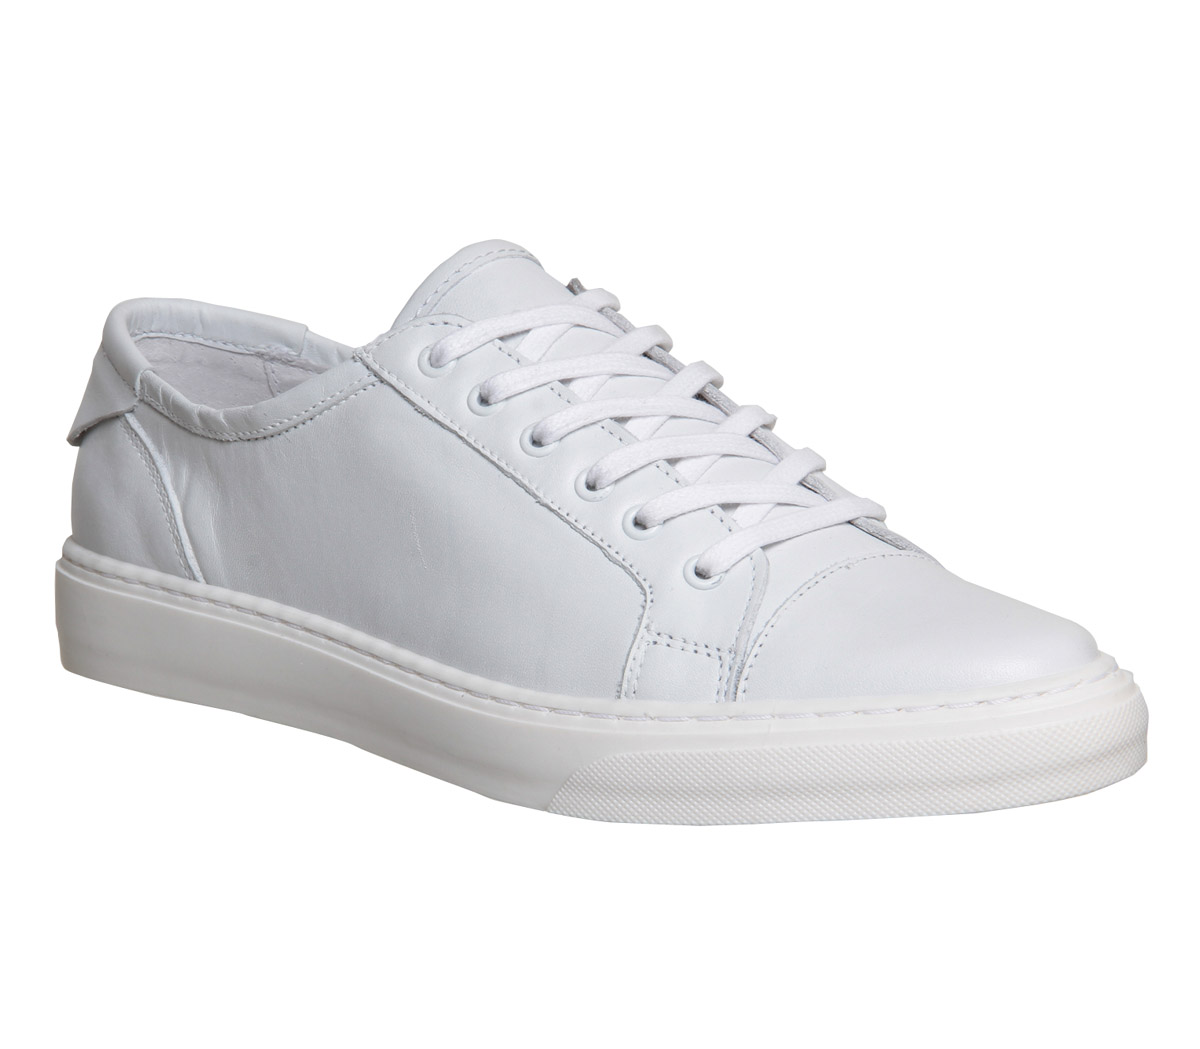 OFFICELibra Point Lace Up TrainerWhite Leather